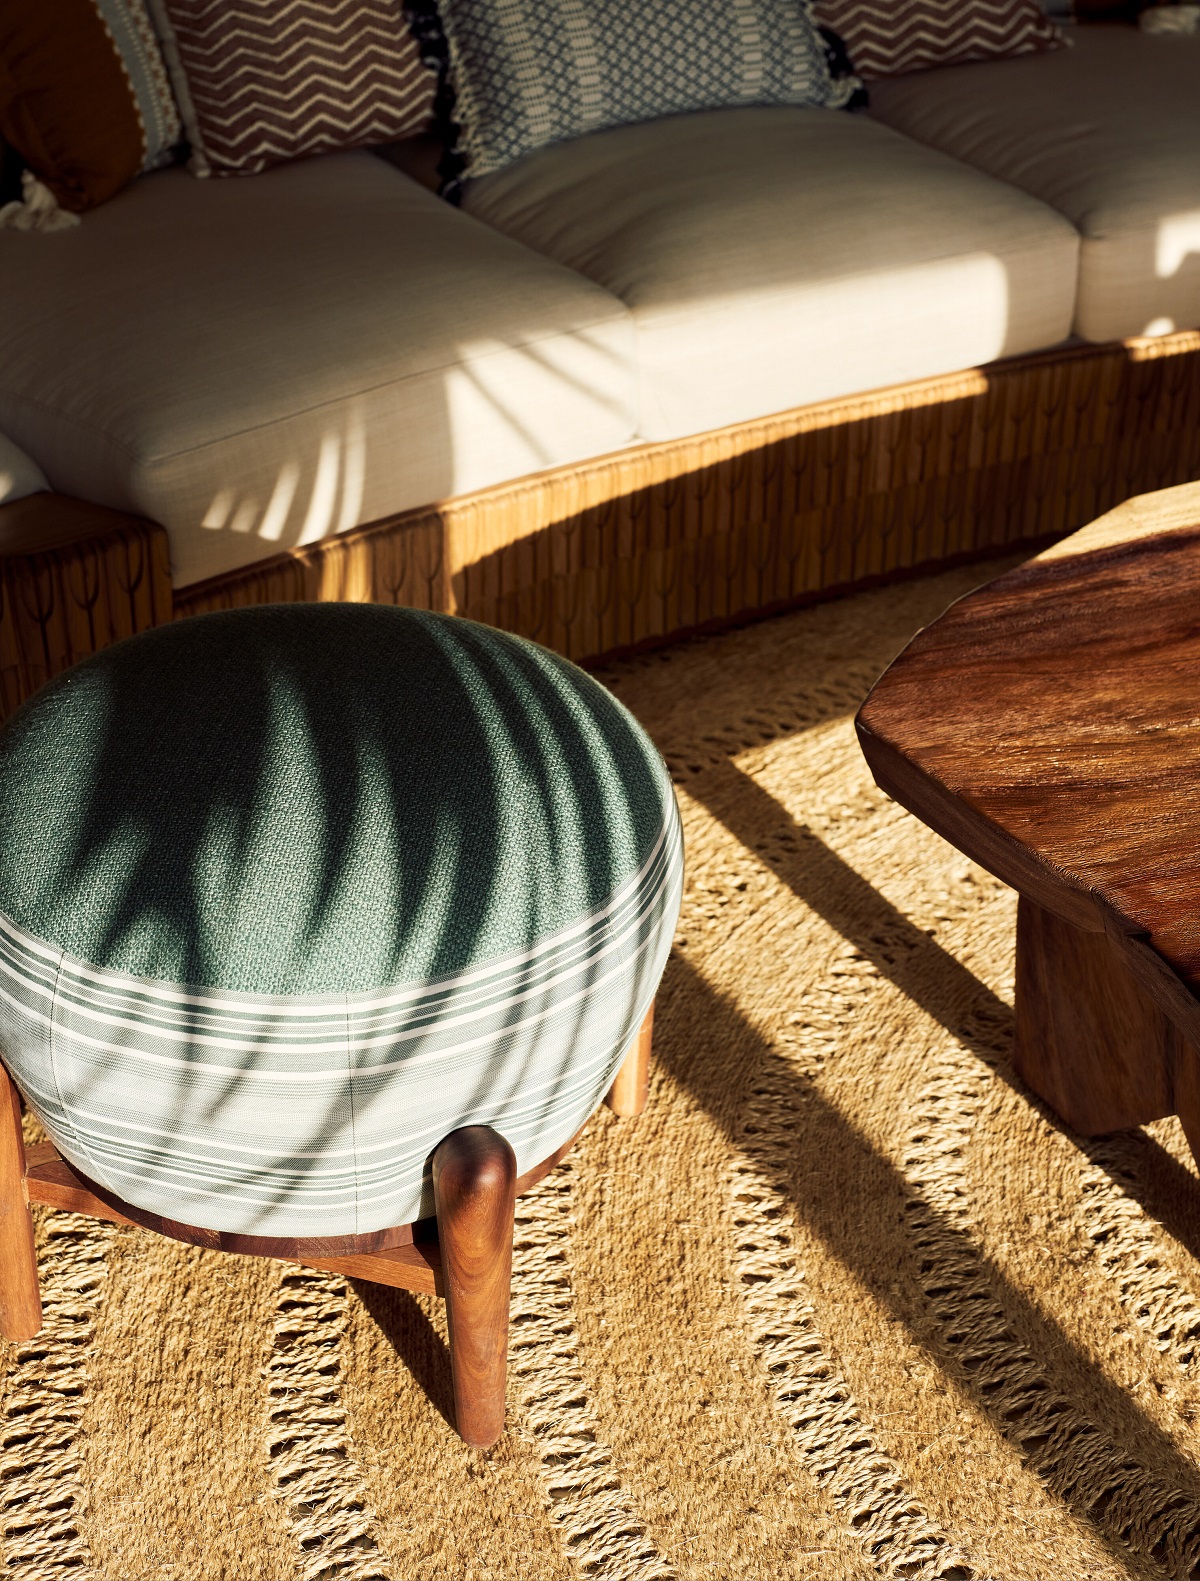 detail of small upholstered stool and woven jute carpet for the Maroma hotel by local artisans